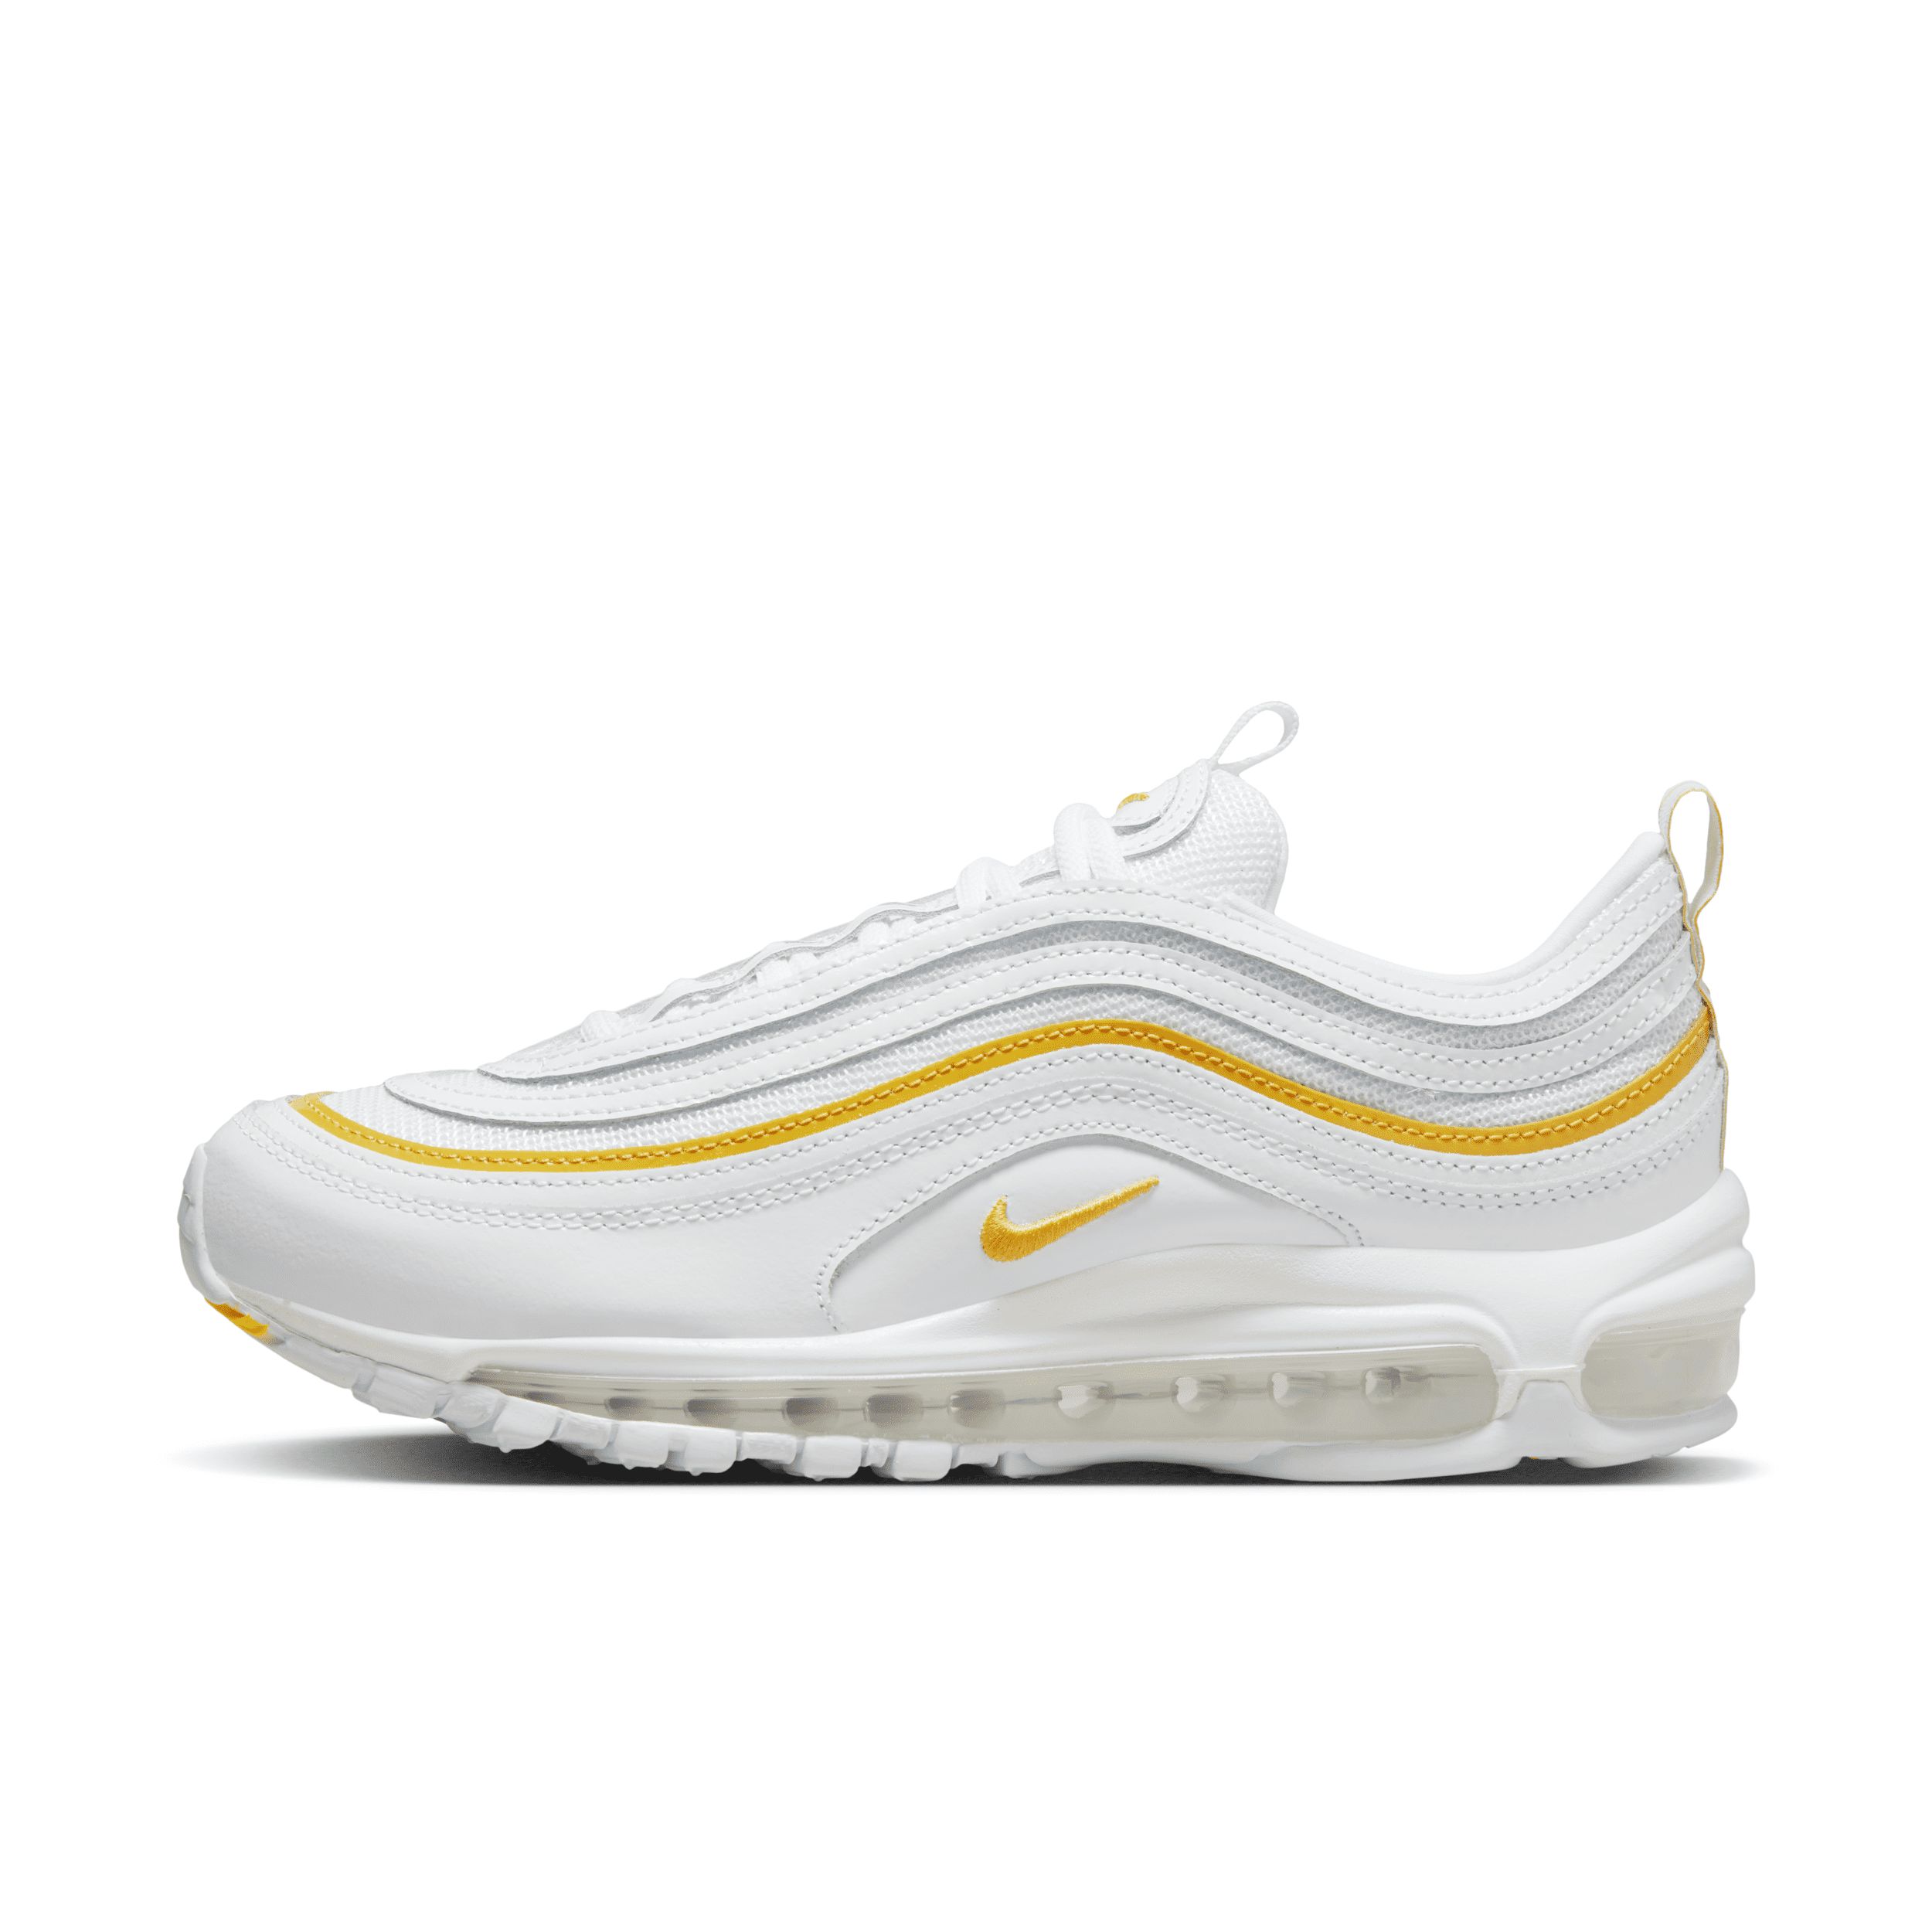 Nike Women's Air Max 97 Shoes in White, Size: 5.5 | DM8268-100 | Nike (US)